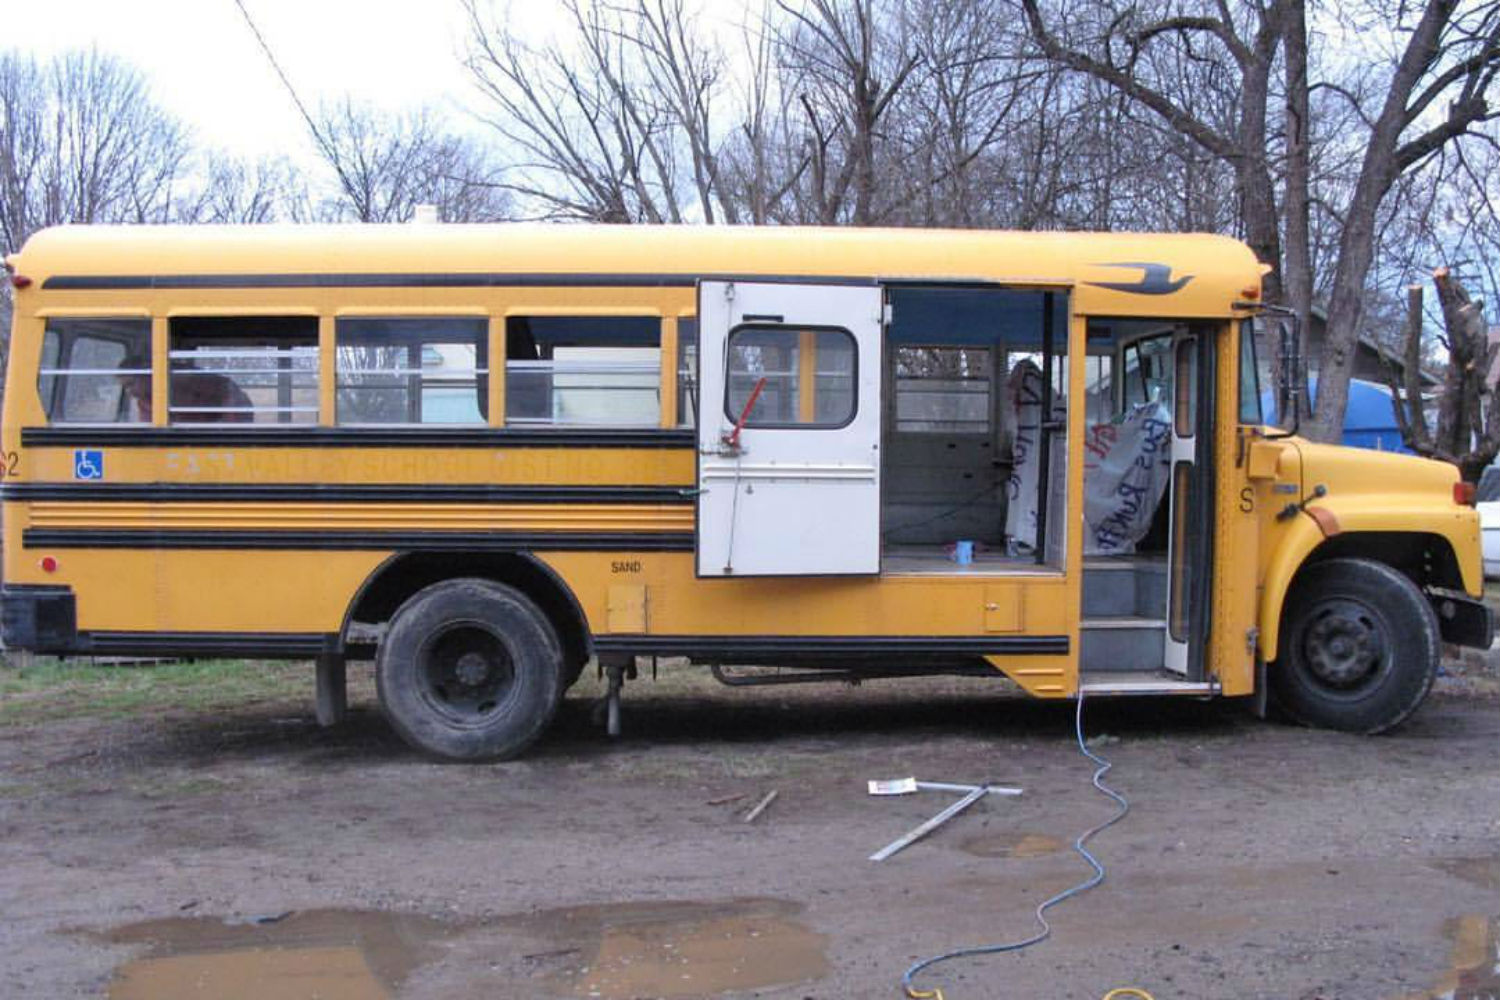 coolest bus to mobile home conversions kylevolkmanbusbefore